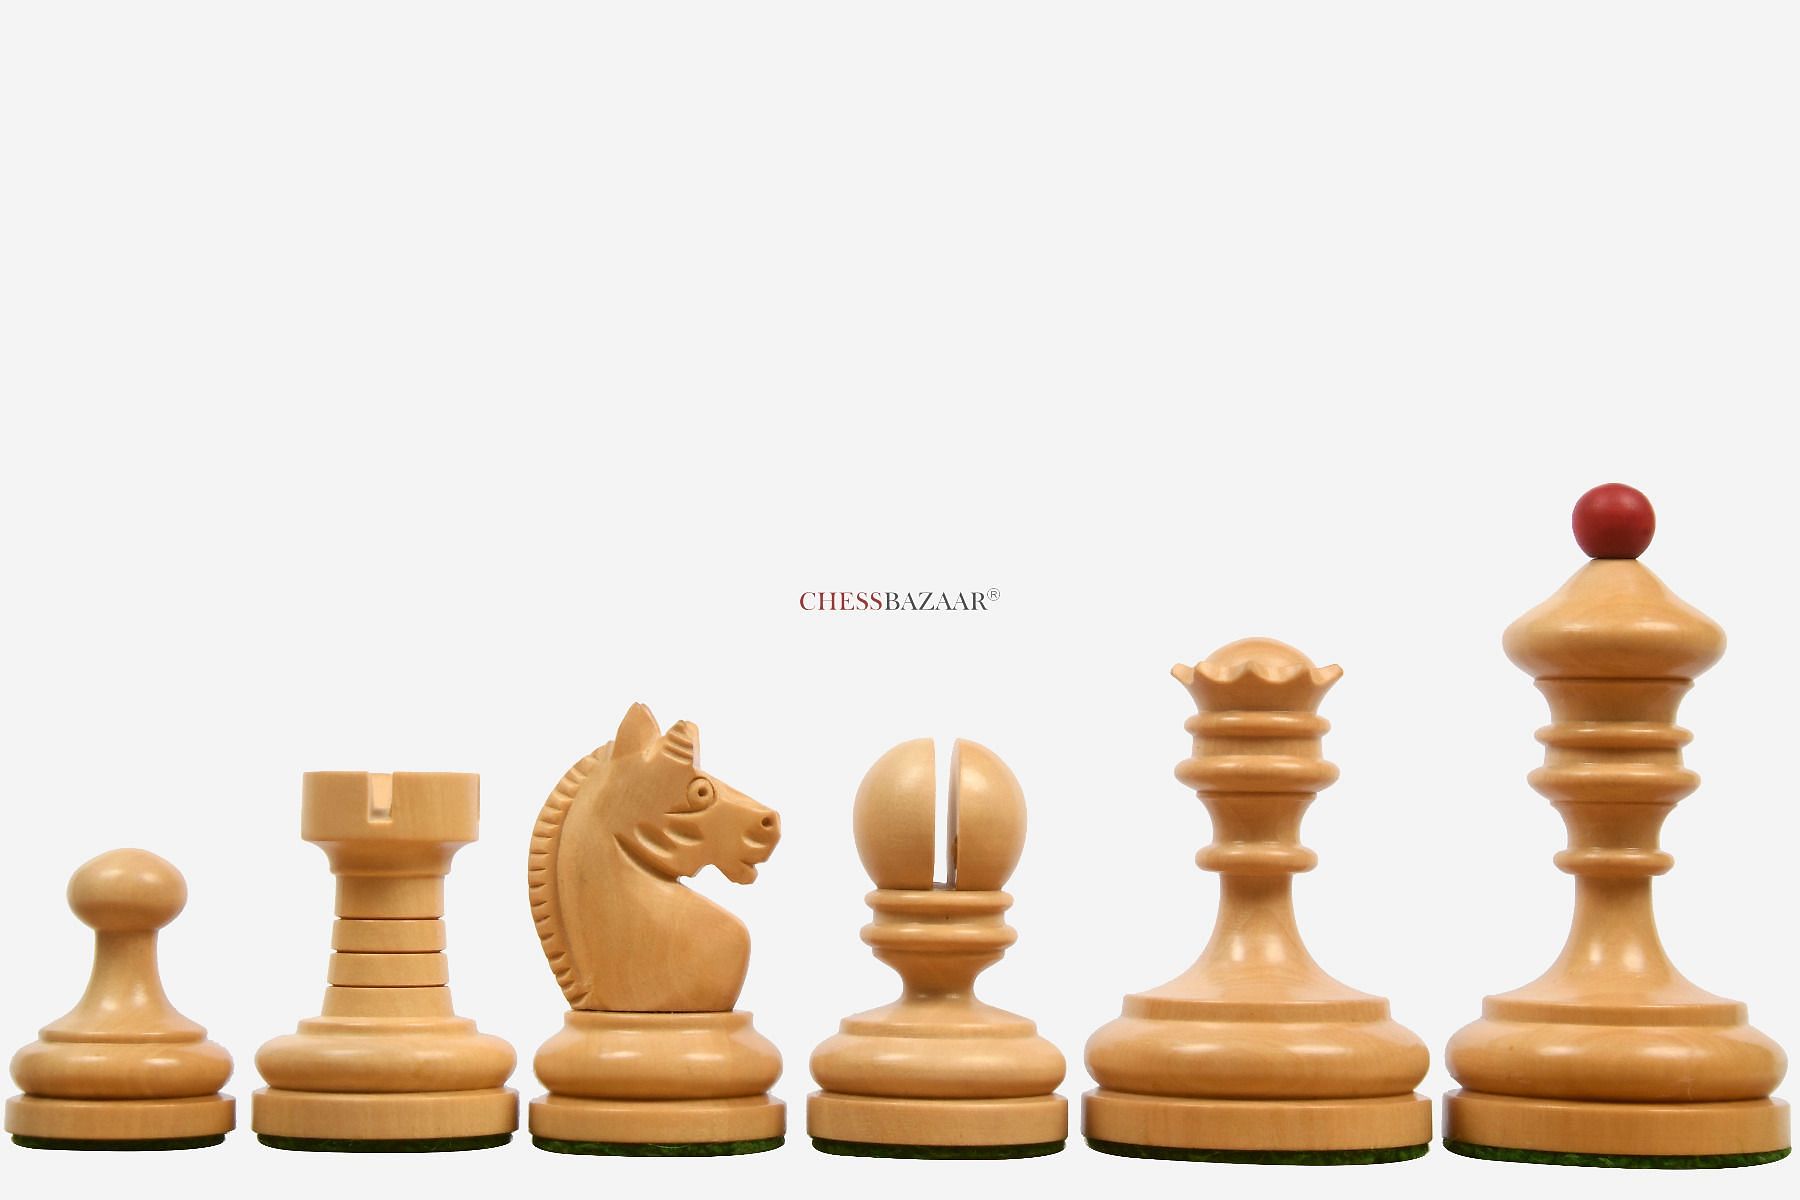 Knubbel Chess Set Weighted for Analysis in 3